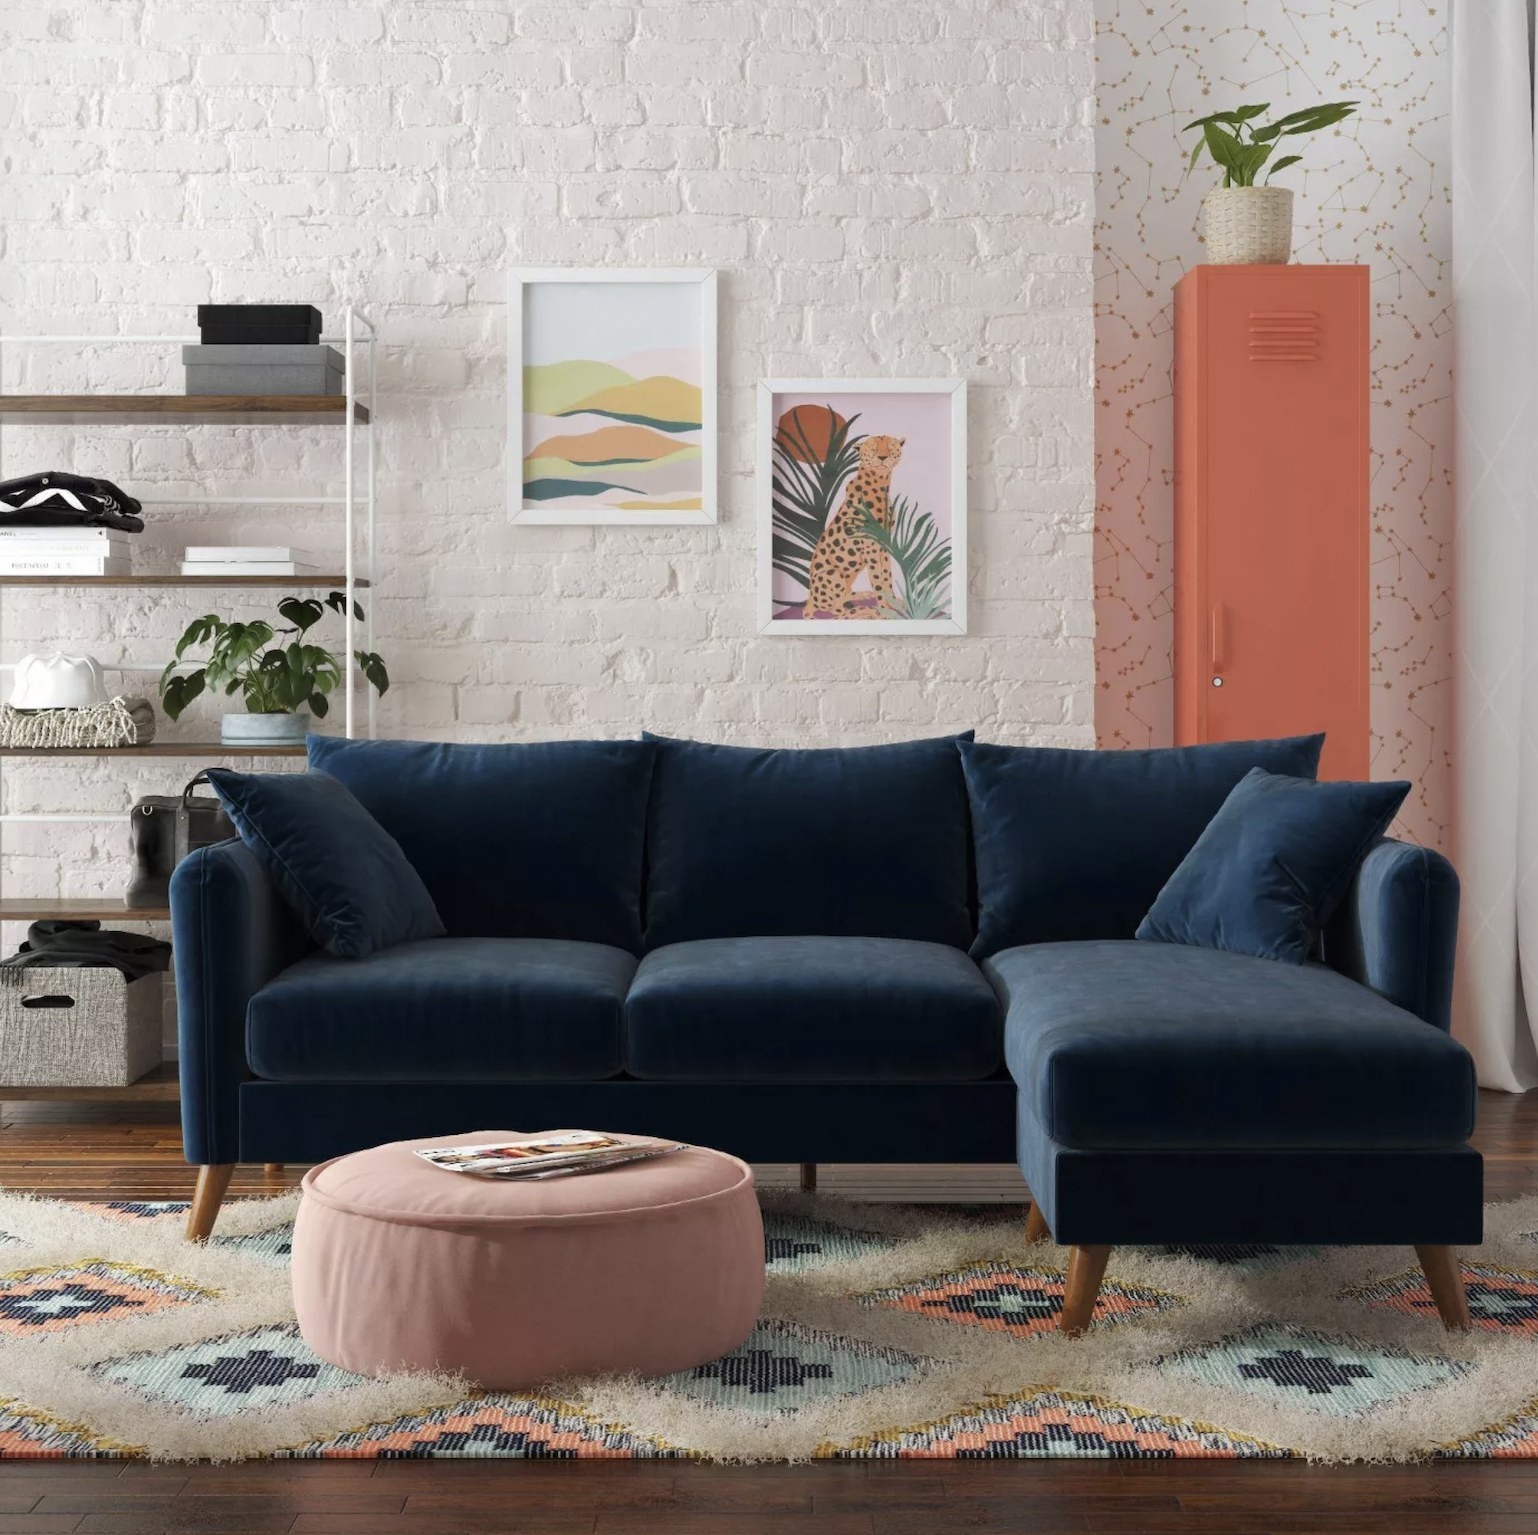 The small navy blue sectional